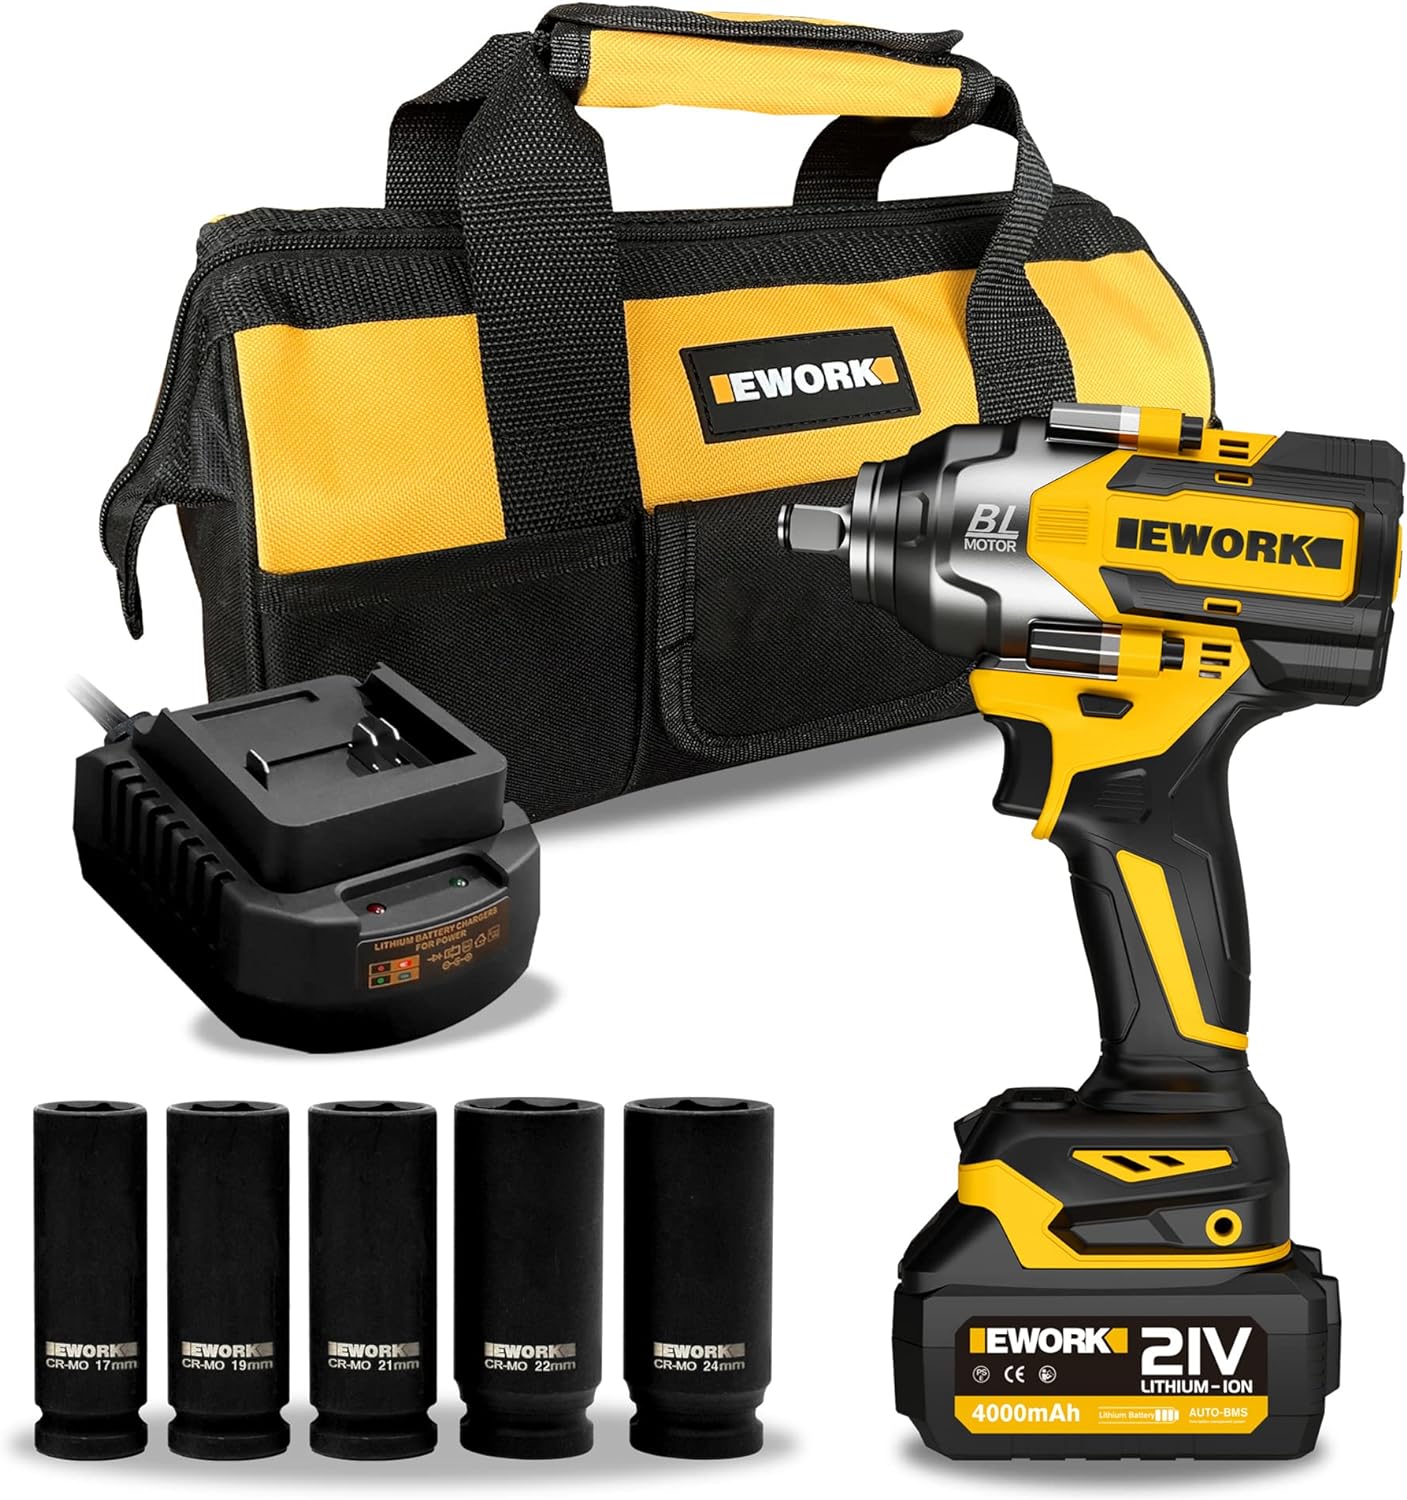 EWORK Cordless Impact Wrench 1/2 inch 21V Brushless High Torque Impact Gun Max 700 Ft-lbs Power with 4.0Ah Li-ion Battery, Fast Charger, 5 Sockets, Tool Bag (RB-810)